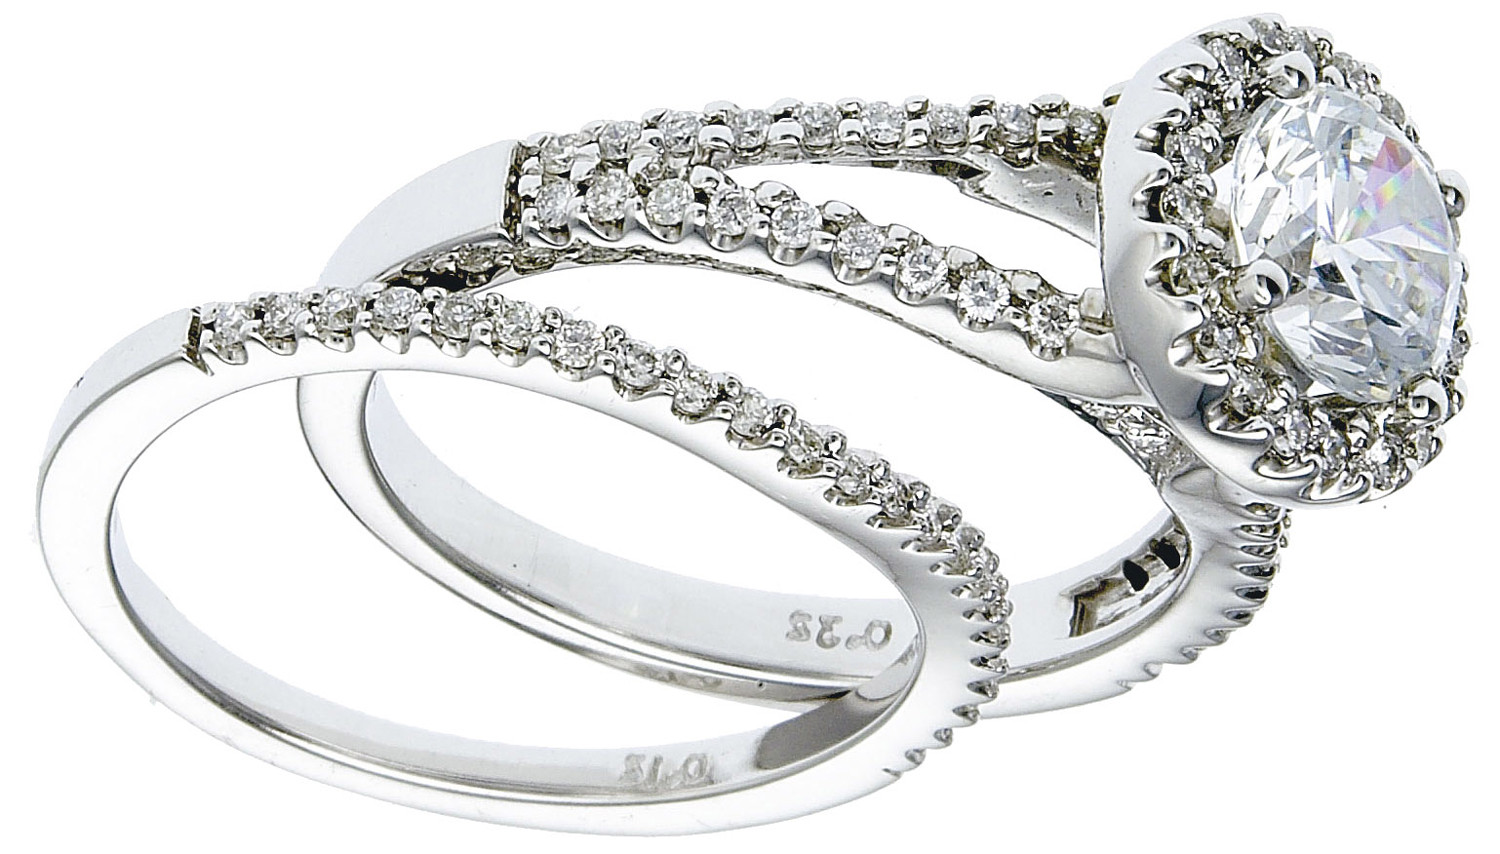 Wedding Rings On Sale
 Engagement Rings Sale White Gold set with Diamonds